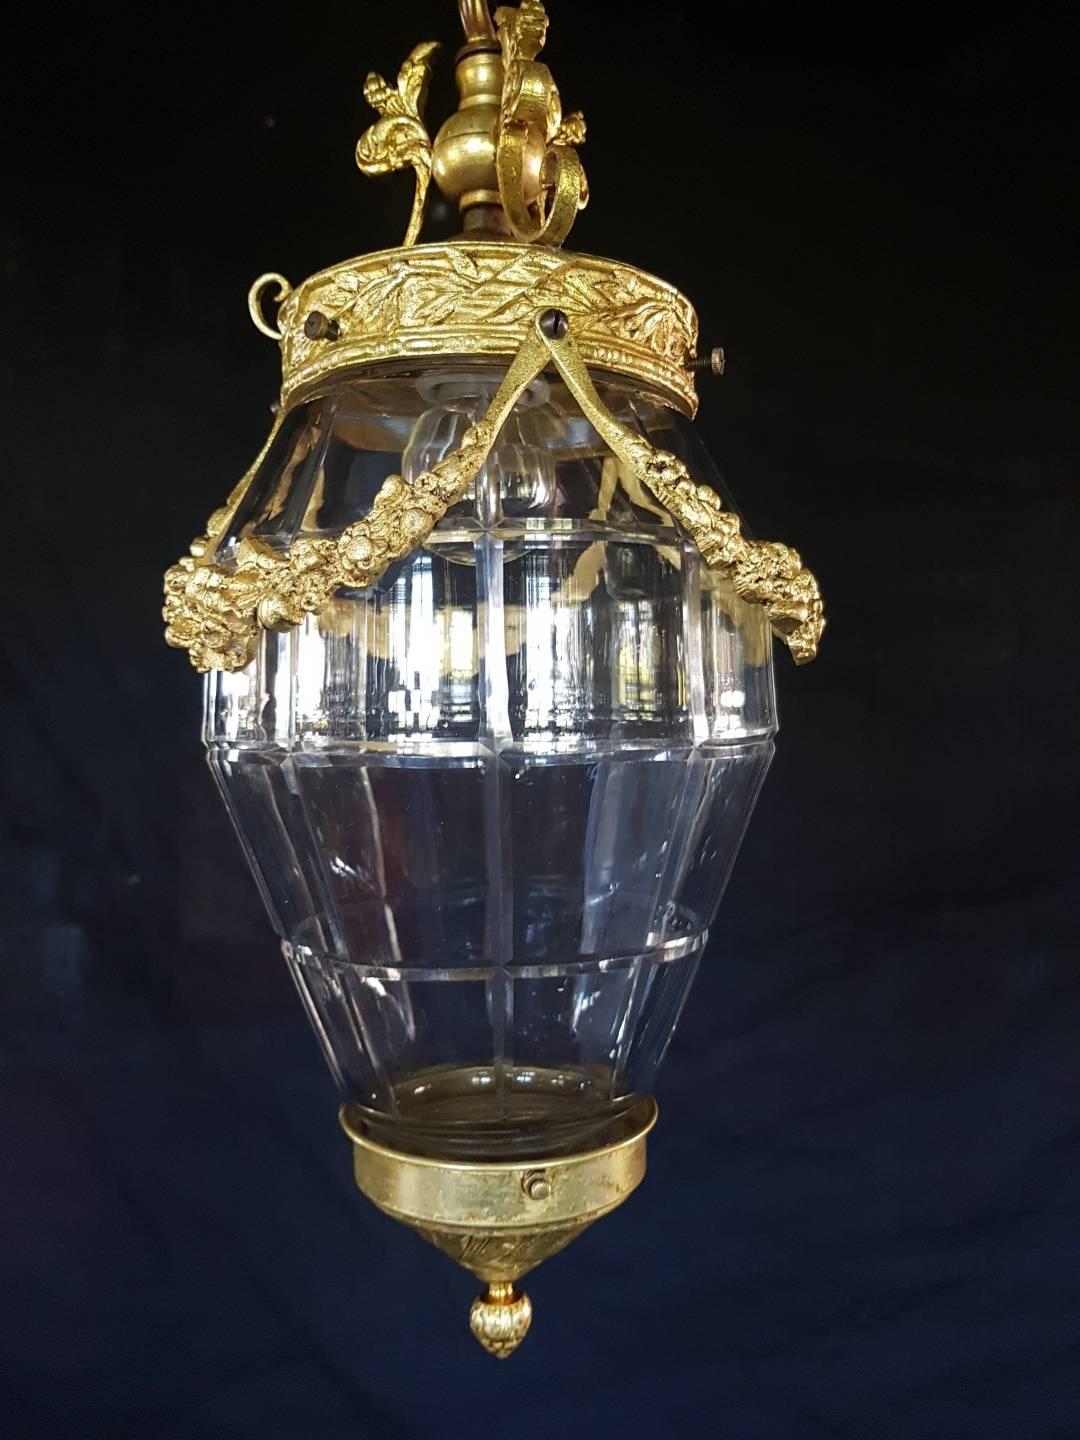 Antique Gilt Bronze Lantern with Molded Cut-Glass For Sale 6